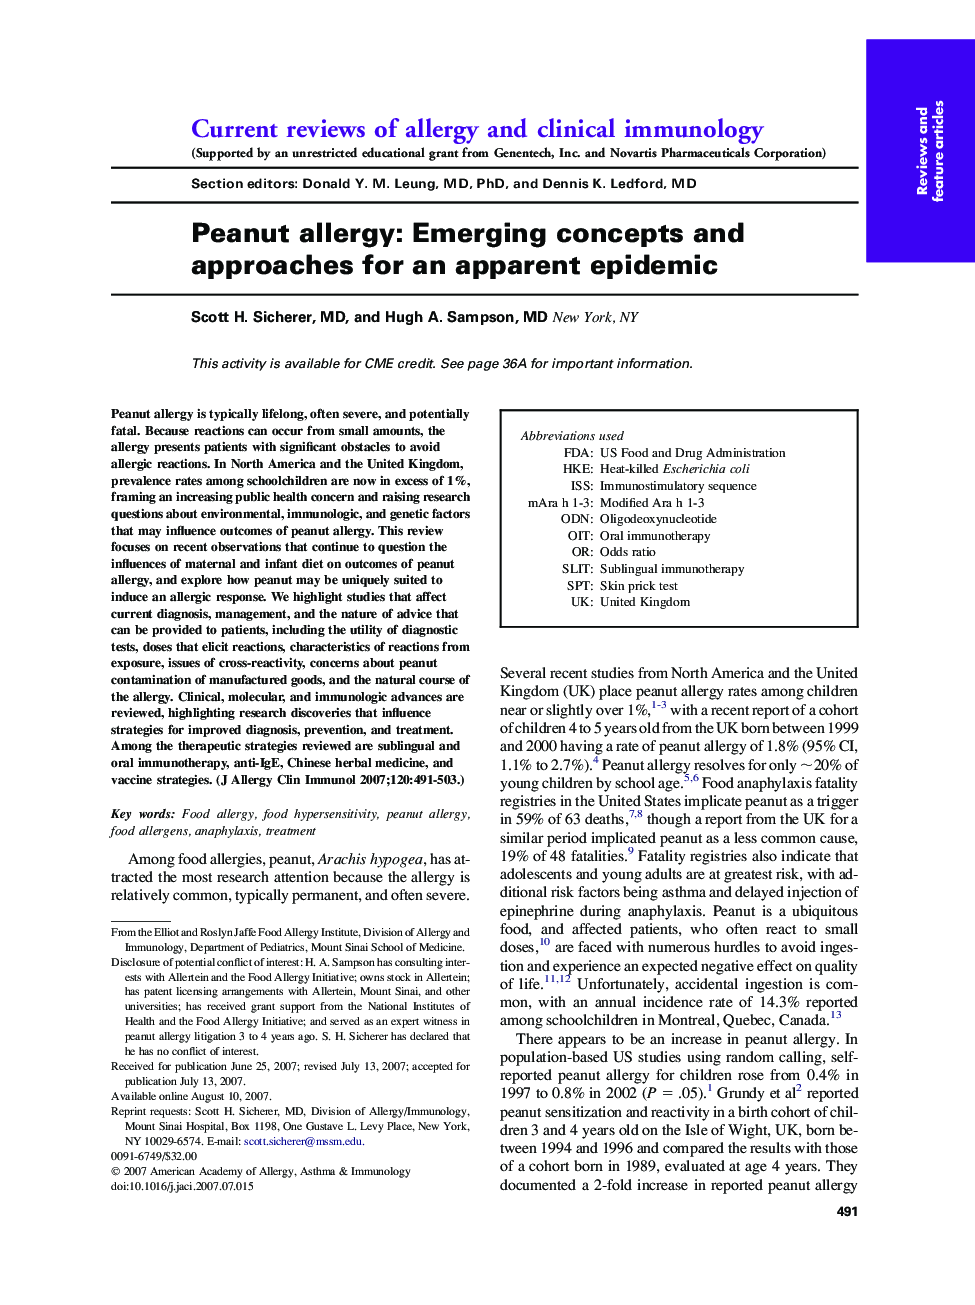 Peanut allergy: Emerging concepts and approaches for an apparent epidemic 